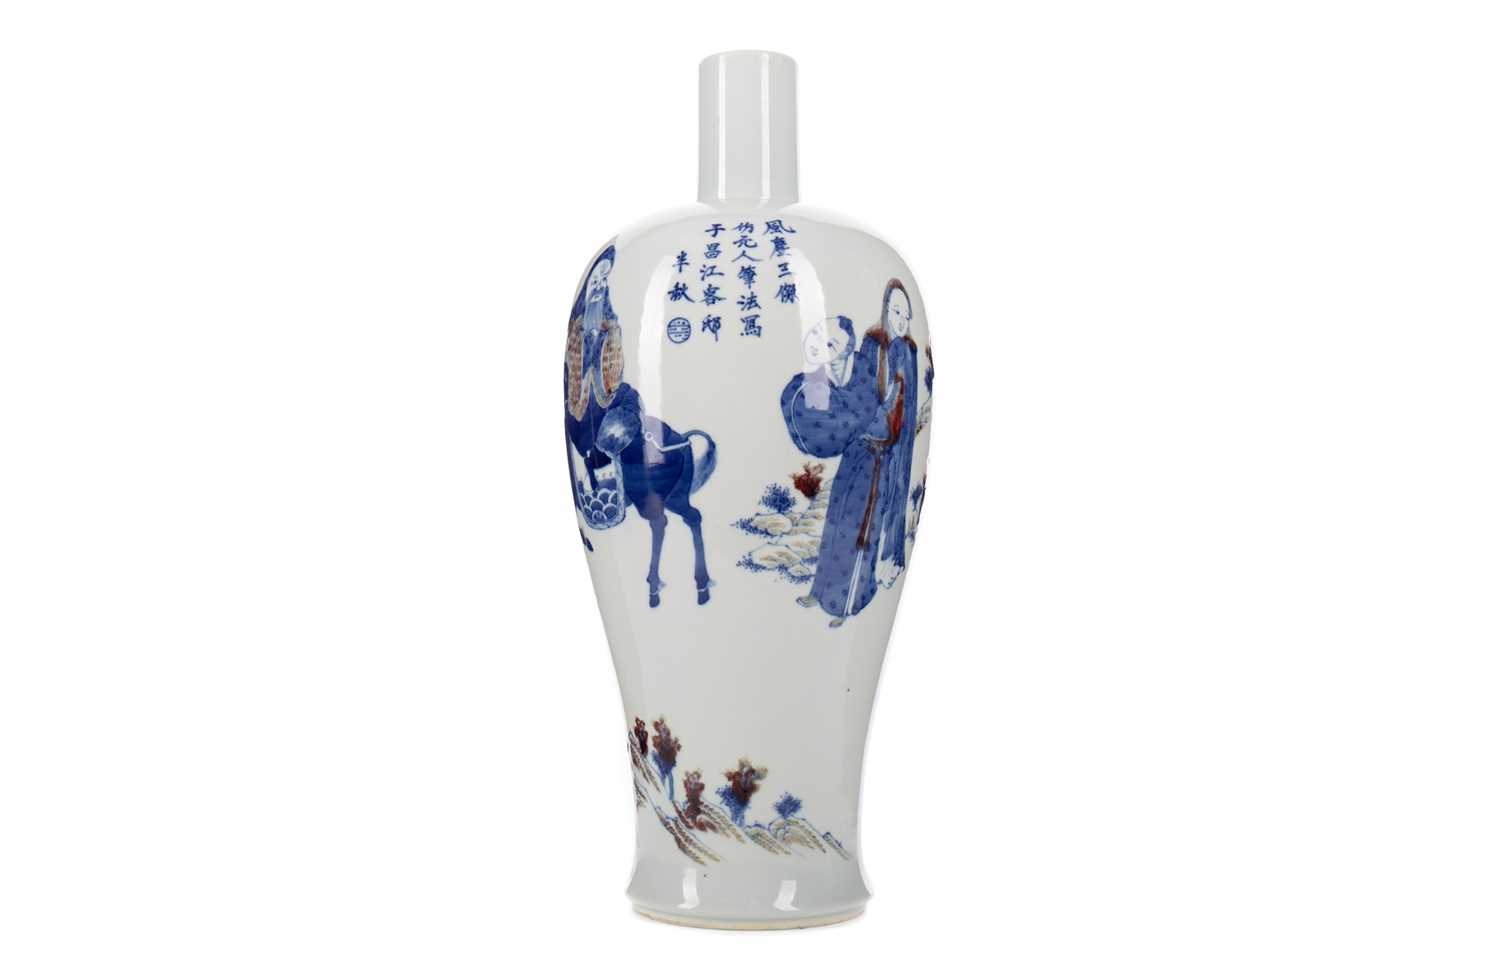 Lot 1750 - AN EARLY 20TH CENTURY CHINESE VASE